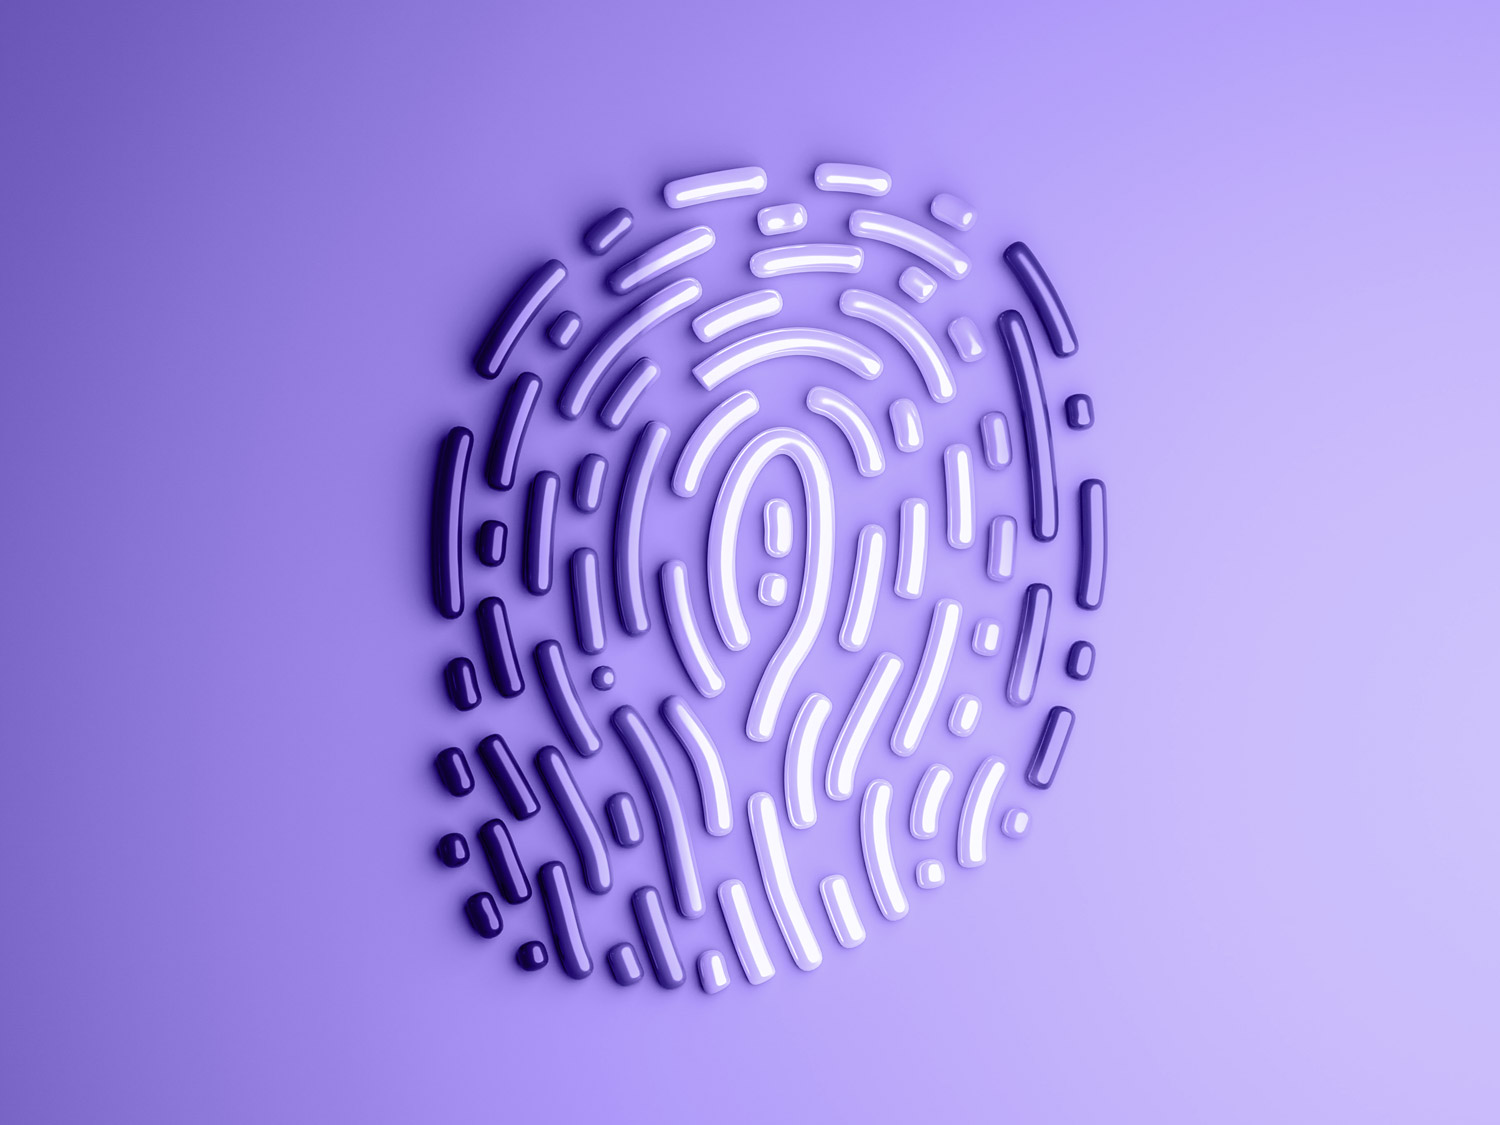 Rendered abstract 3D fingerprint on a purple background